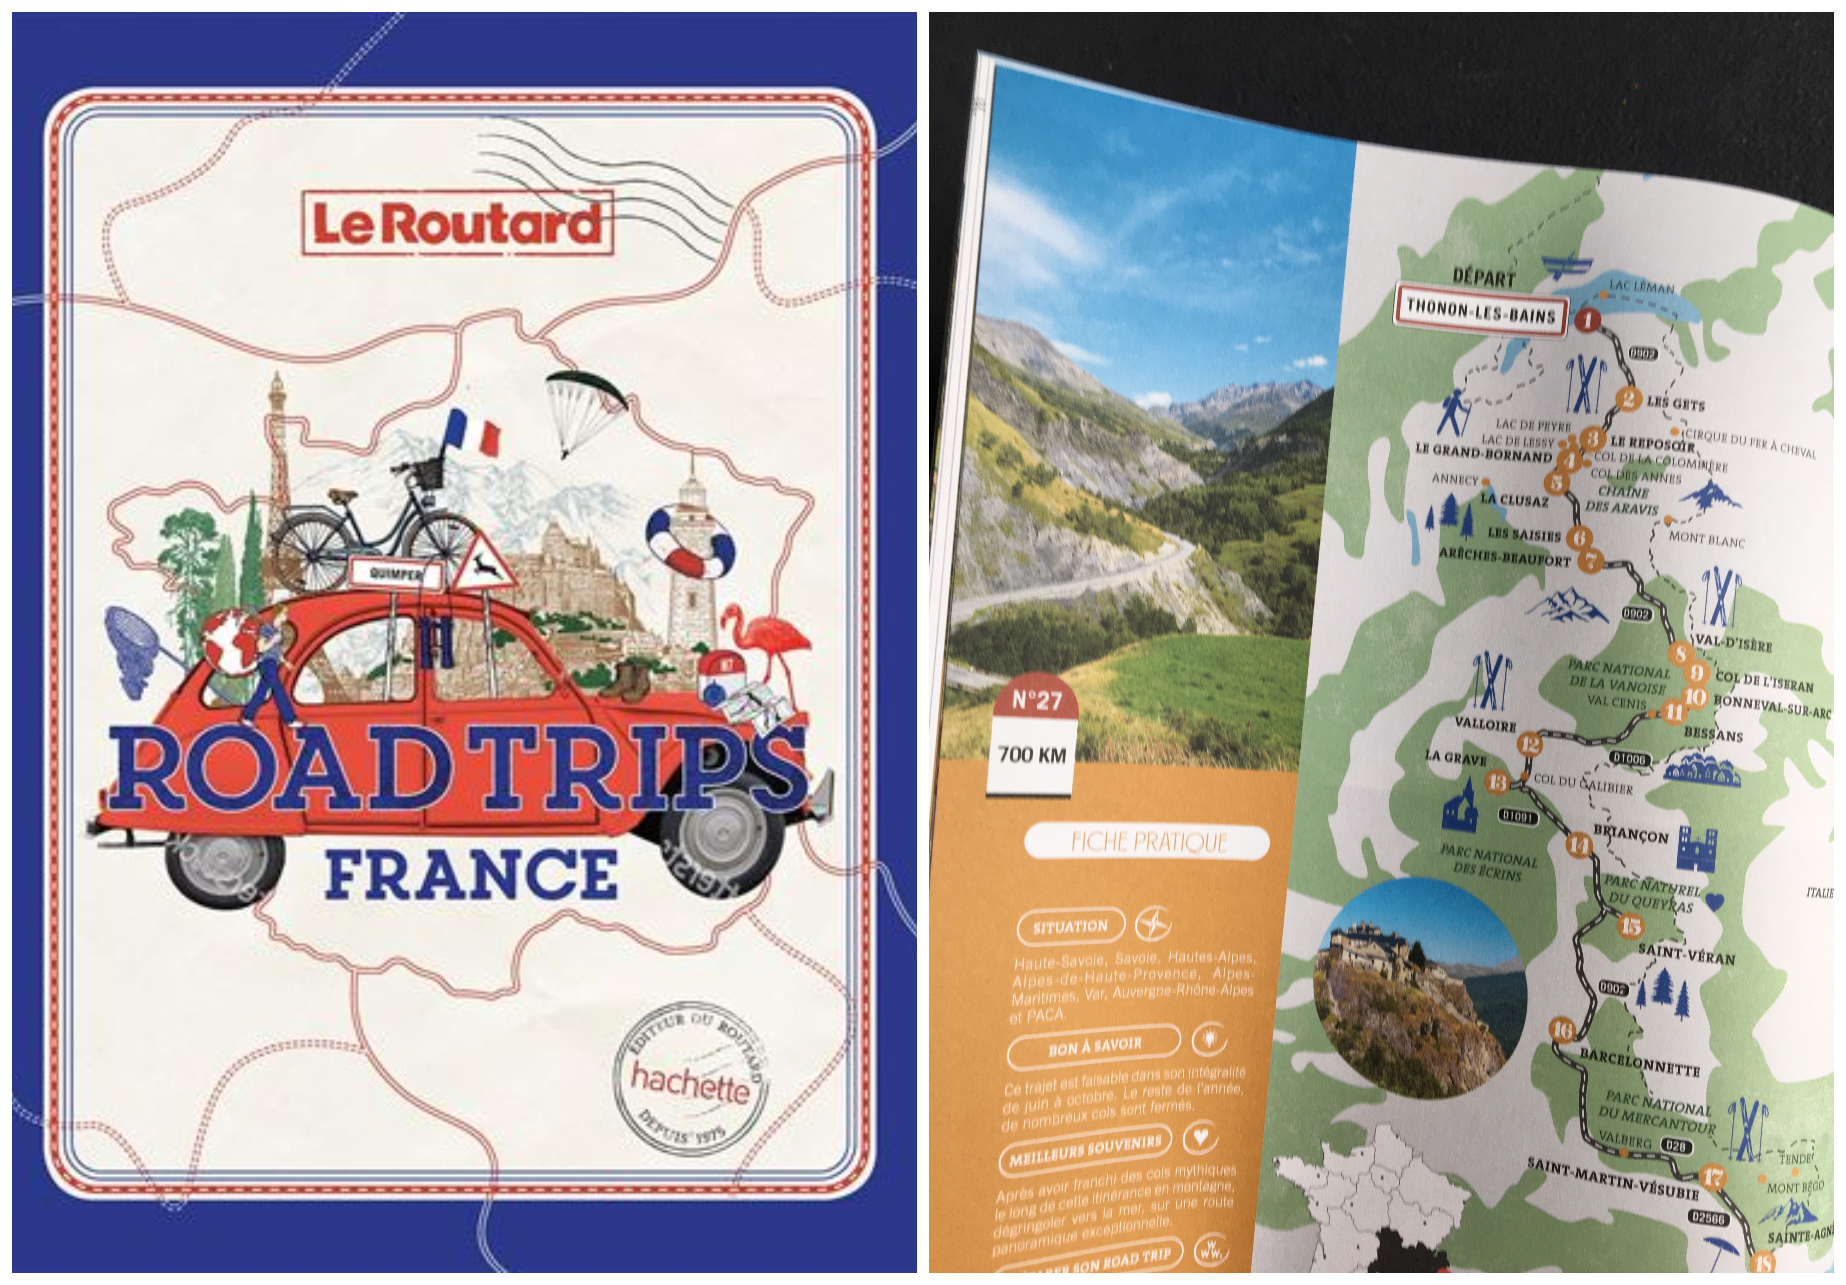 Road trips France – Le Routard